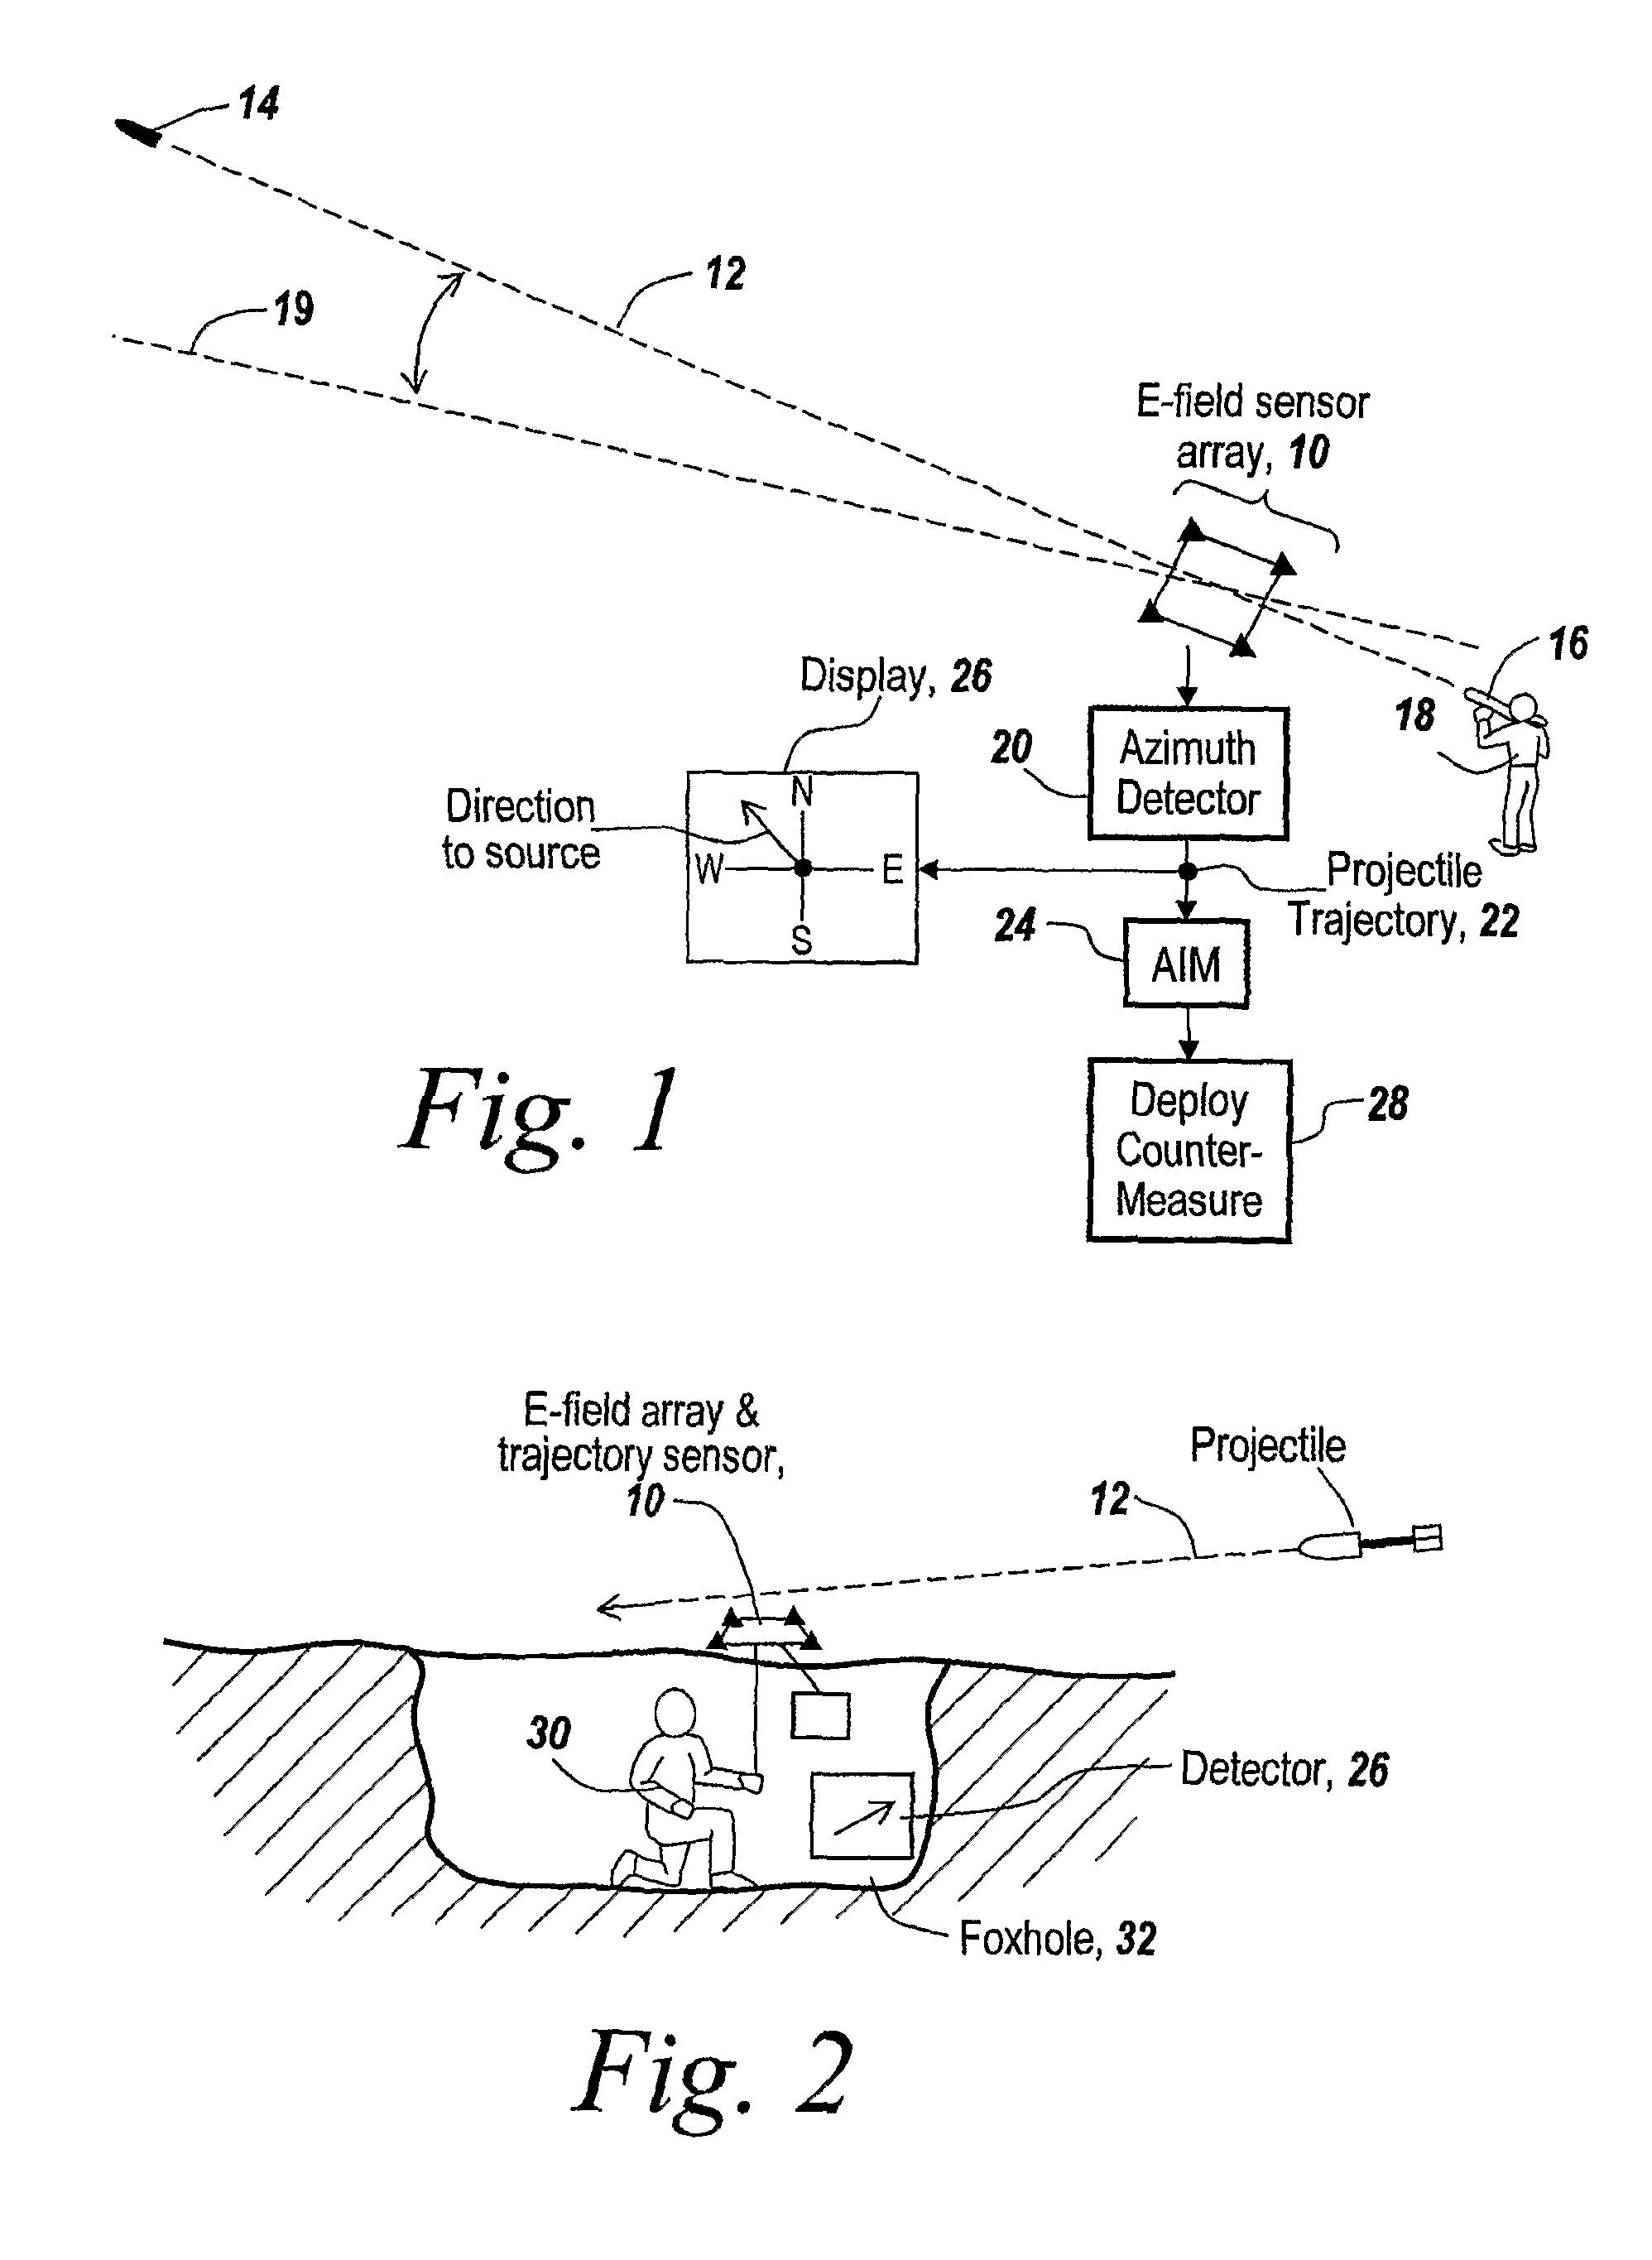 Method and apparatus for detecting sources of projectiles